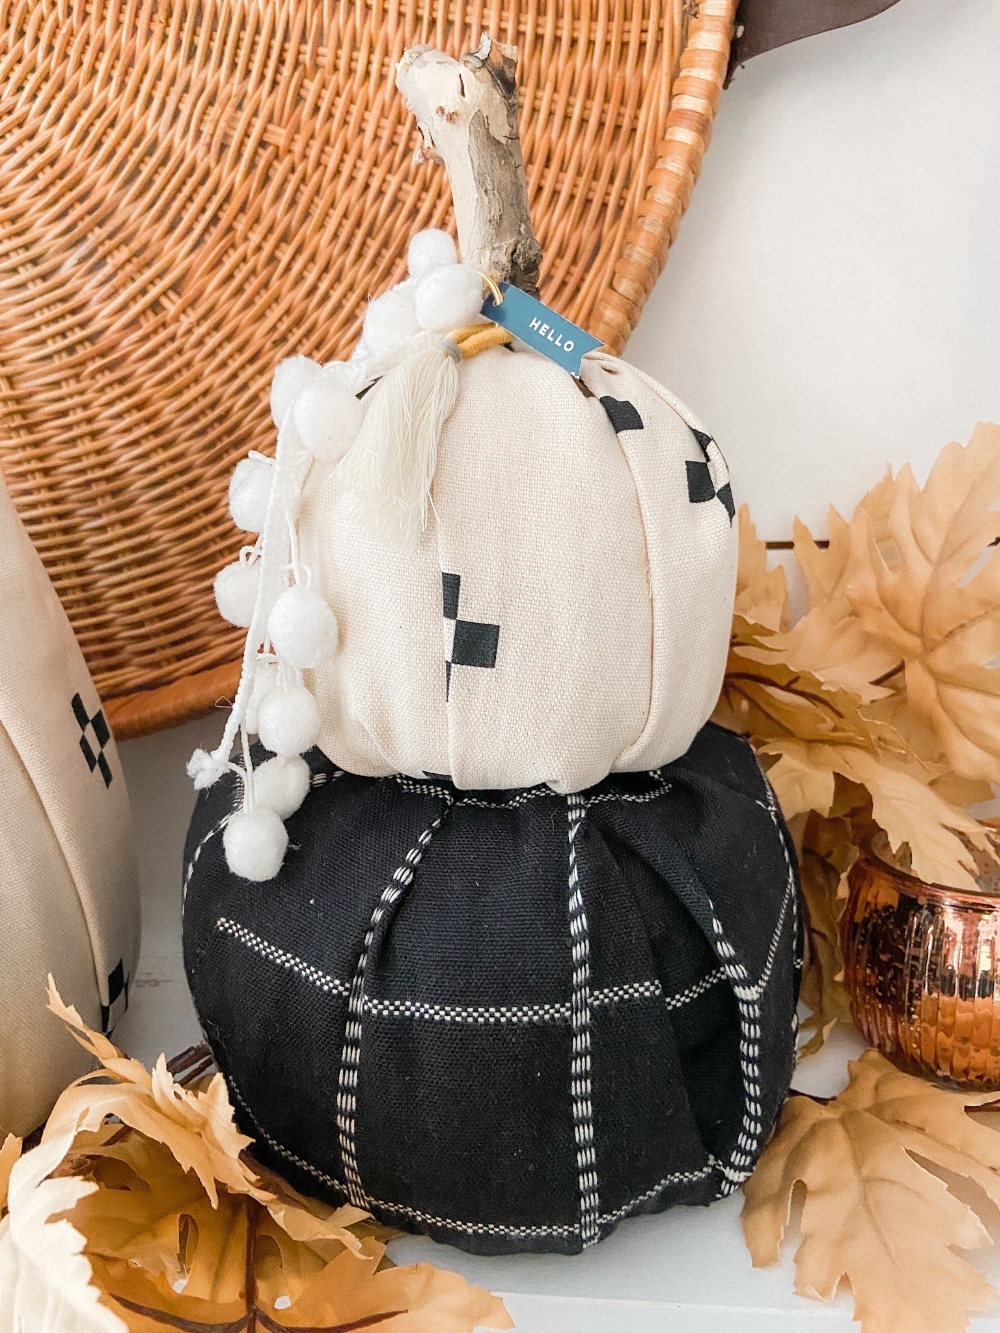 Elevated Fabric Toilet Paper Pumpkins. Transform toilet paper into the cutest pumpkins for fall in FOUR different shapes and customize them for YOUR decor!